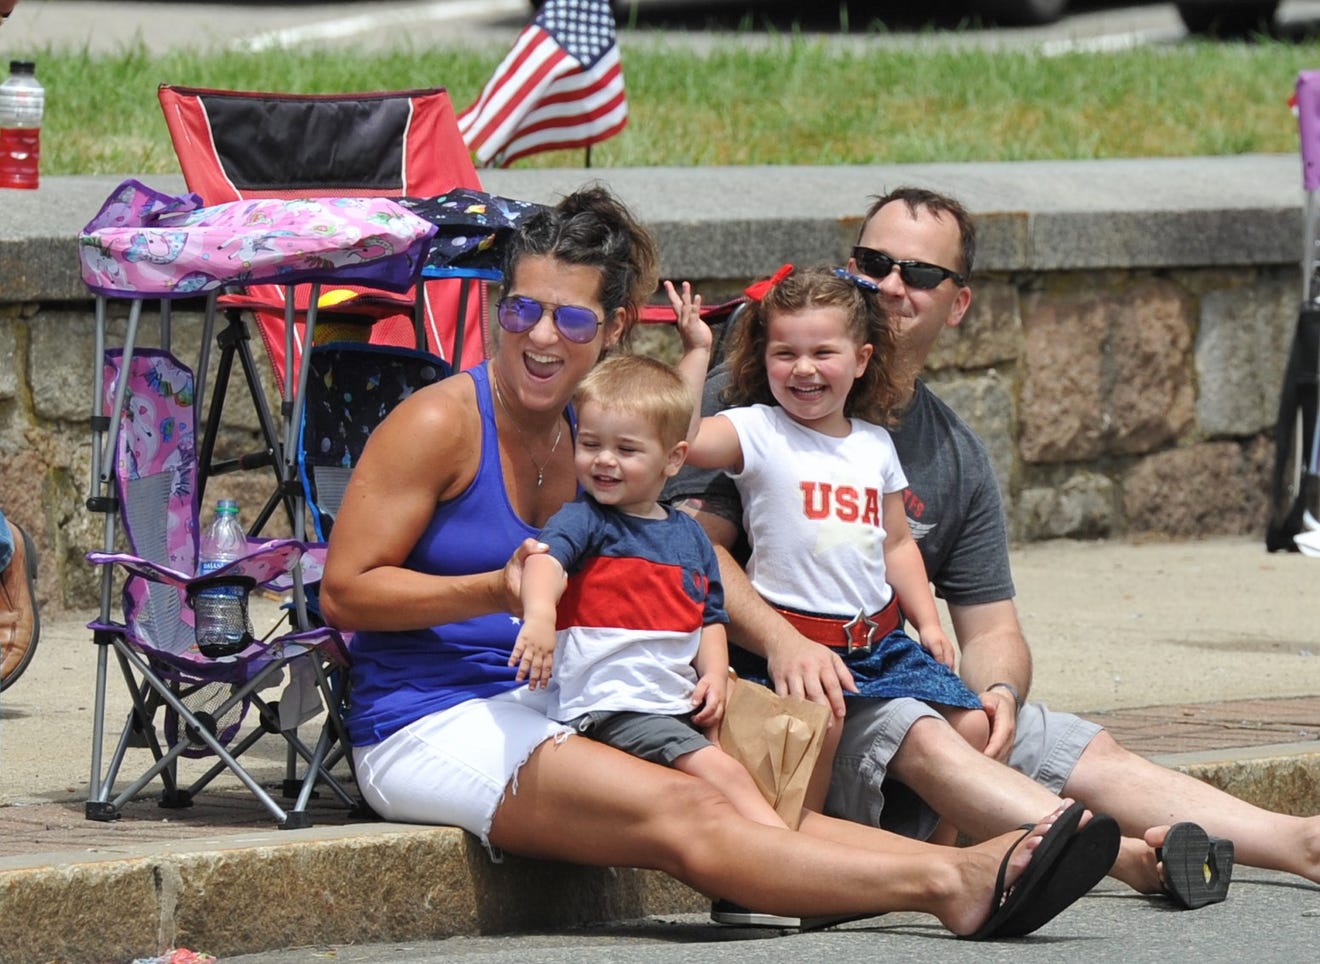 Braintree Day celebration returns with returns with parade, fireworks